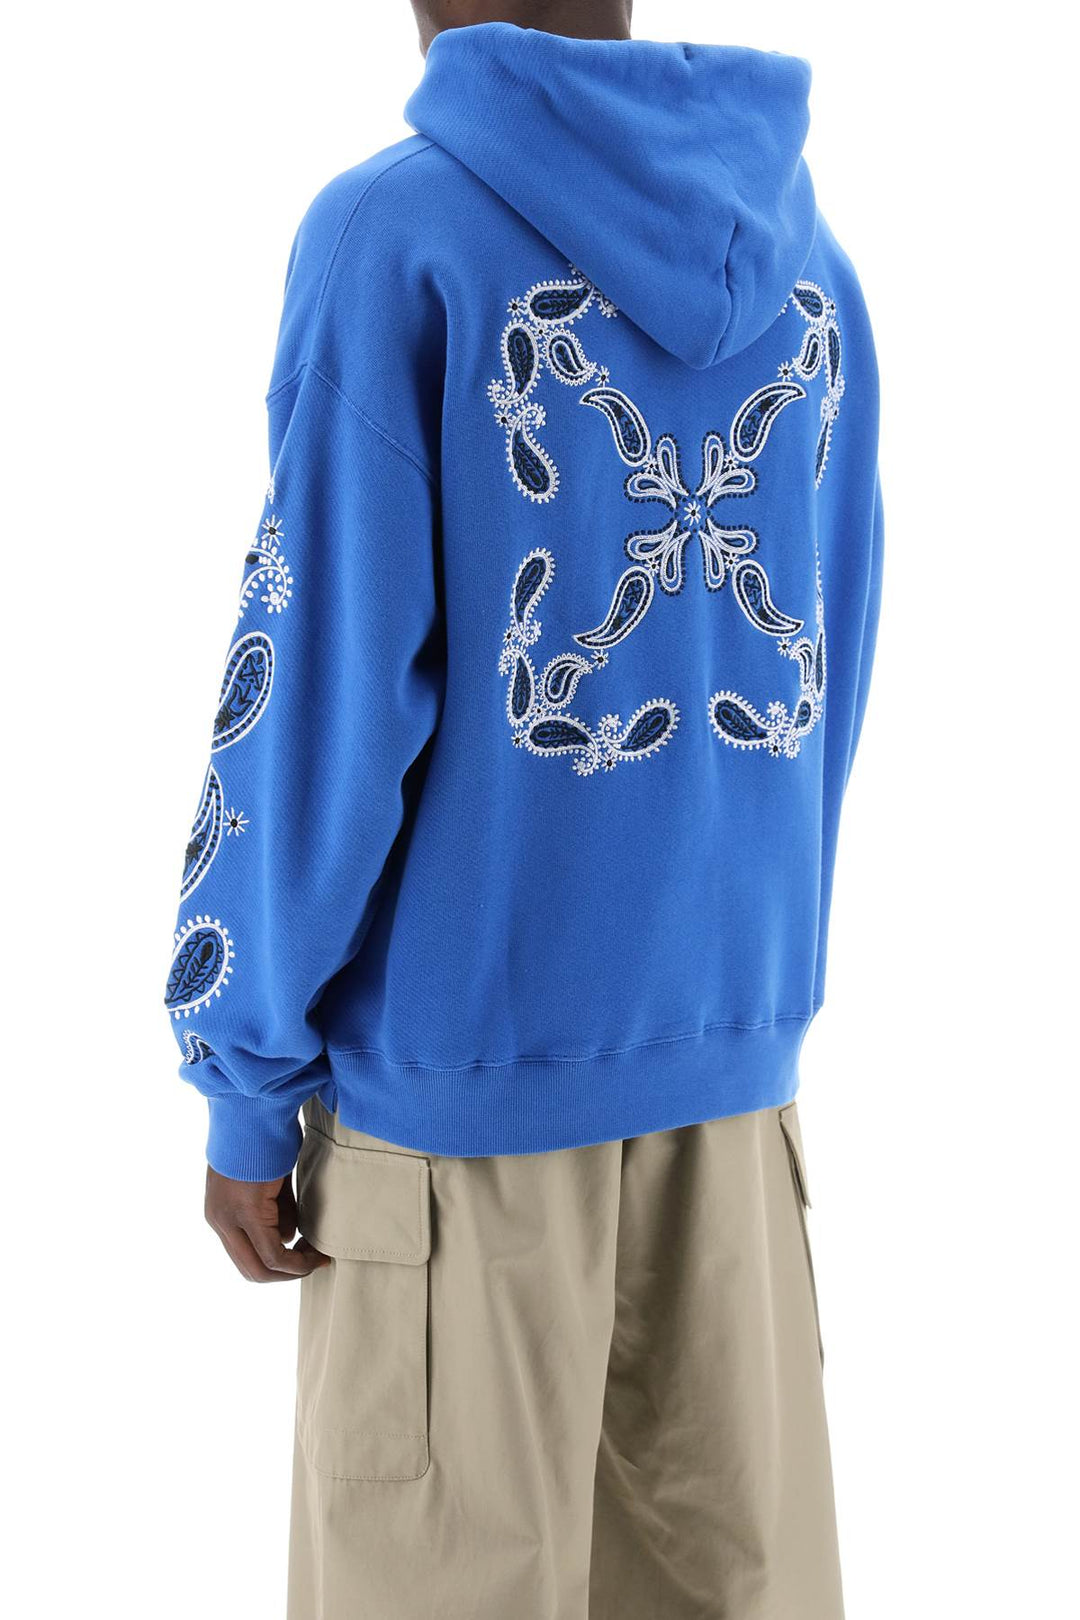 Off White Hooded Sweatshirt With Arrow Band   Blue